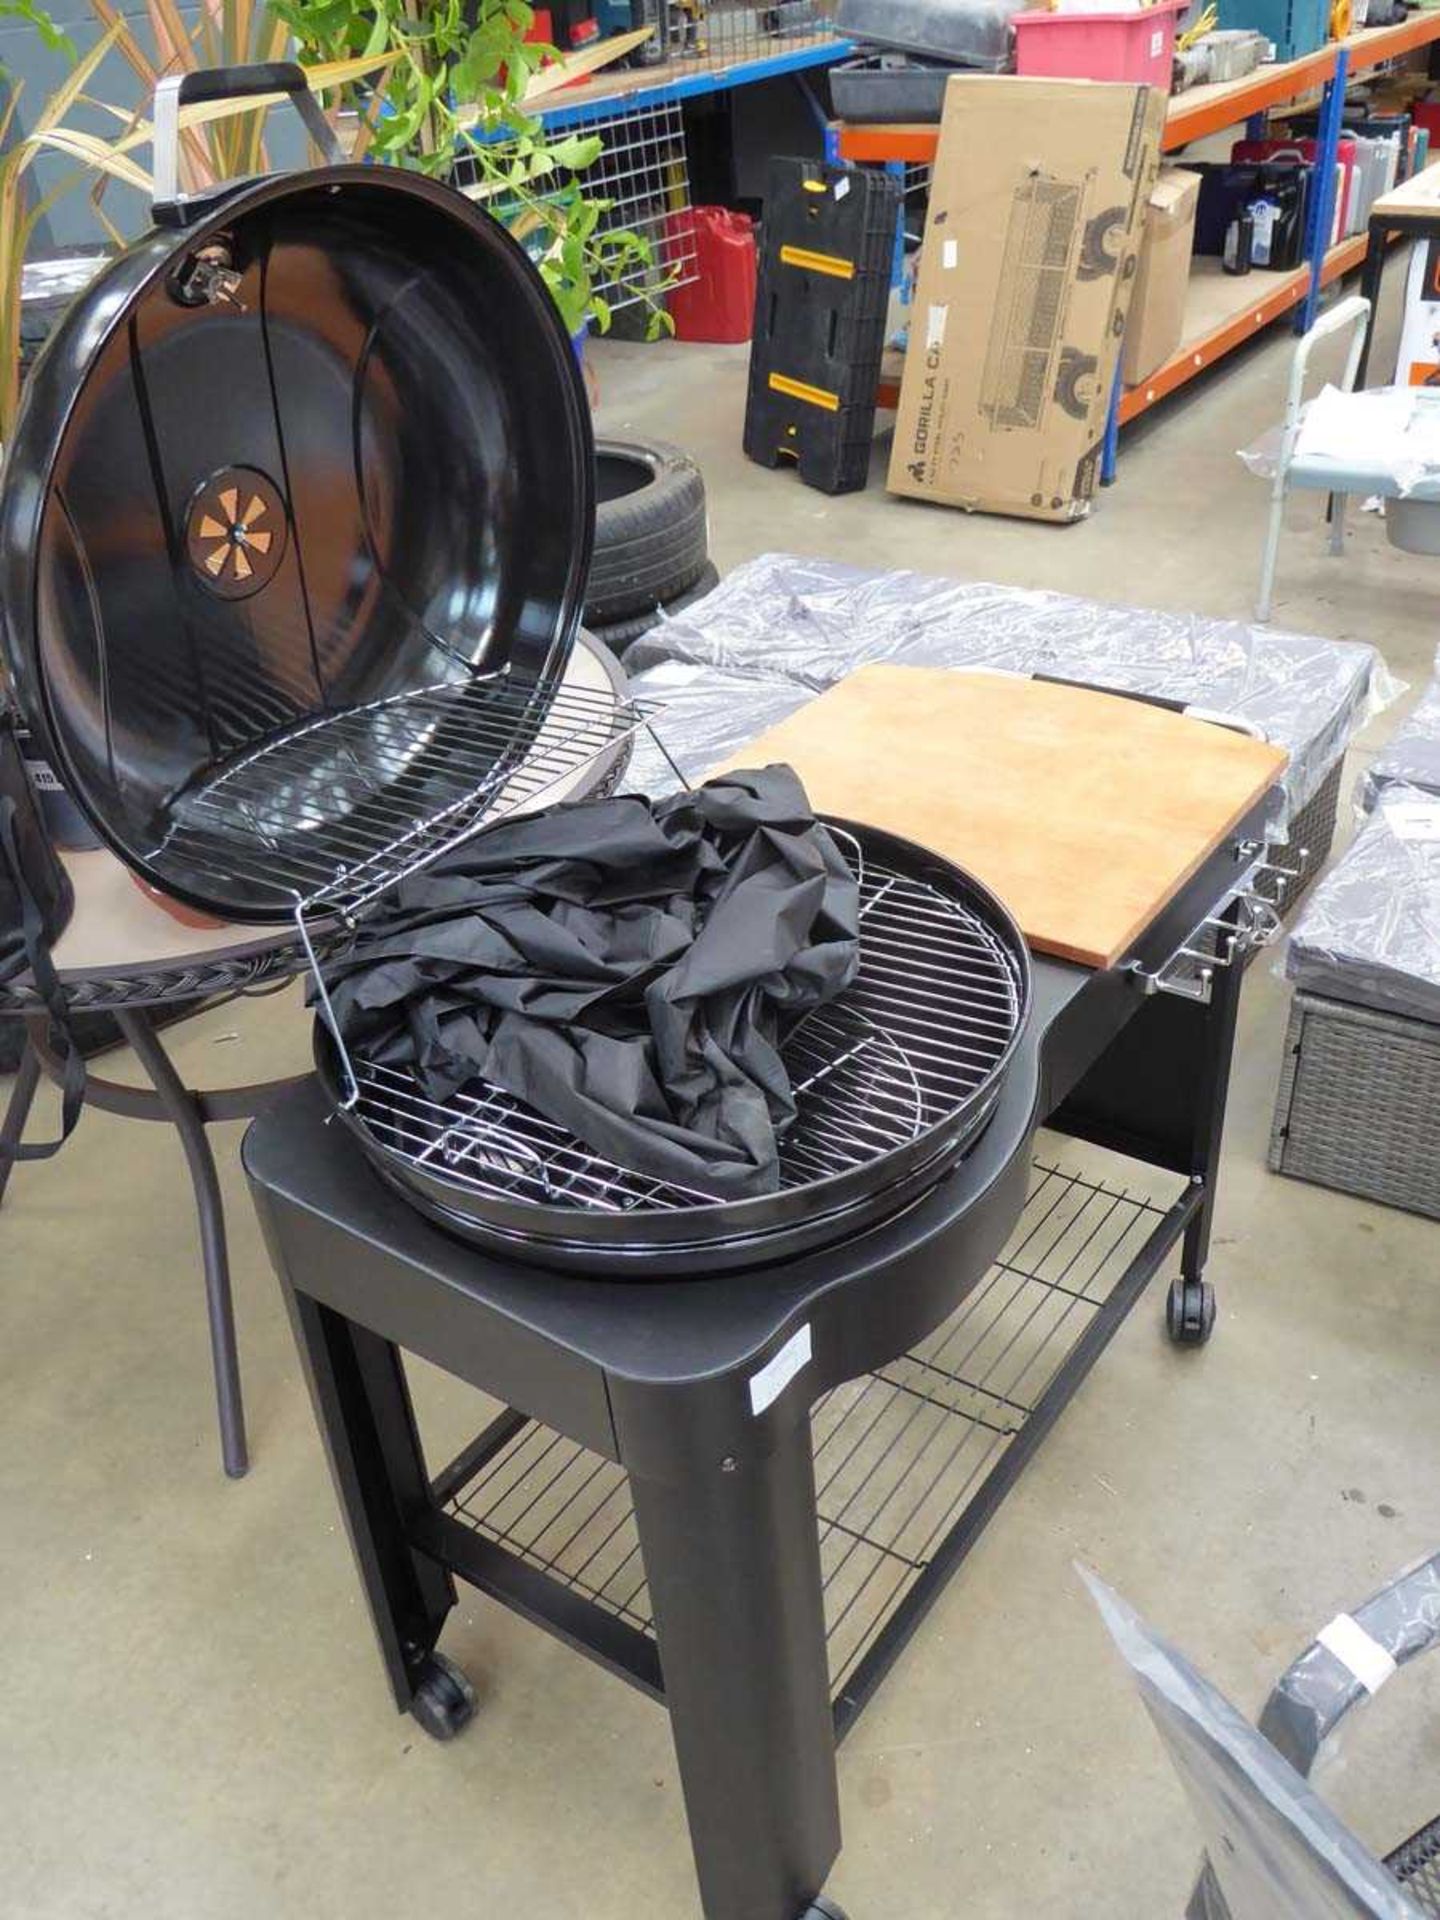 +VAT Large charcoal BBQ on trolley with prep table